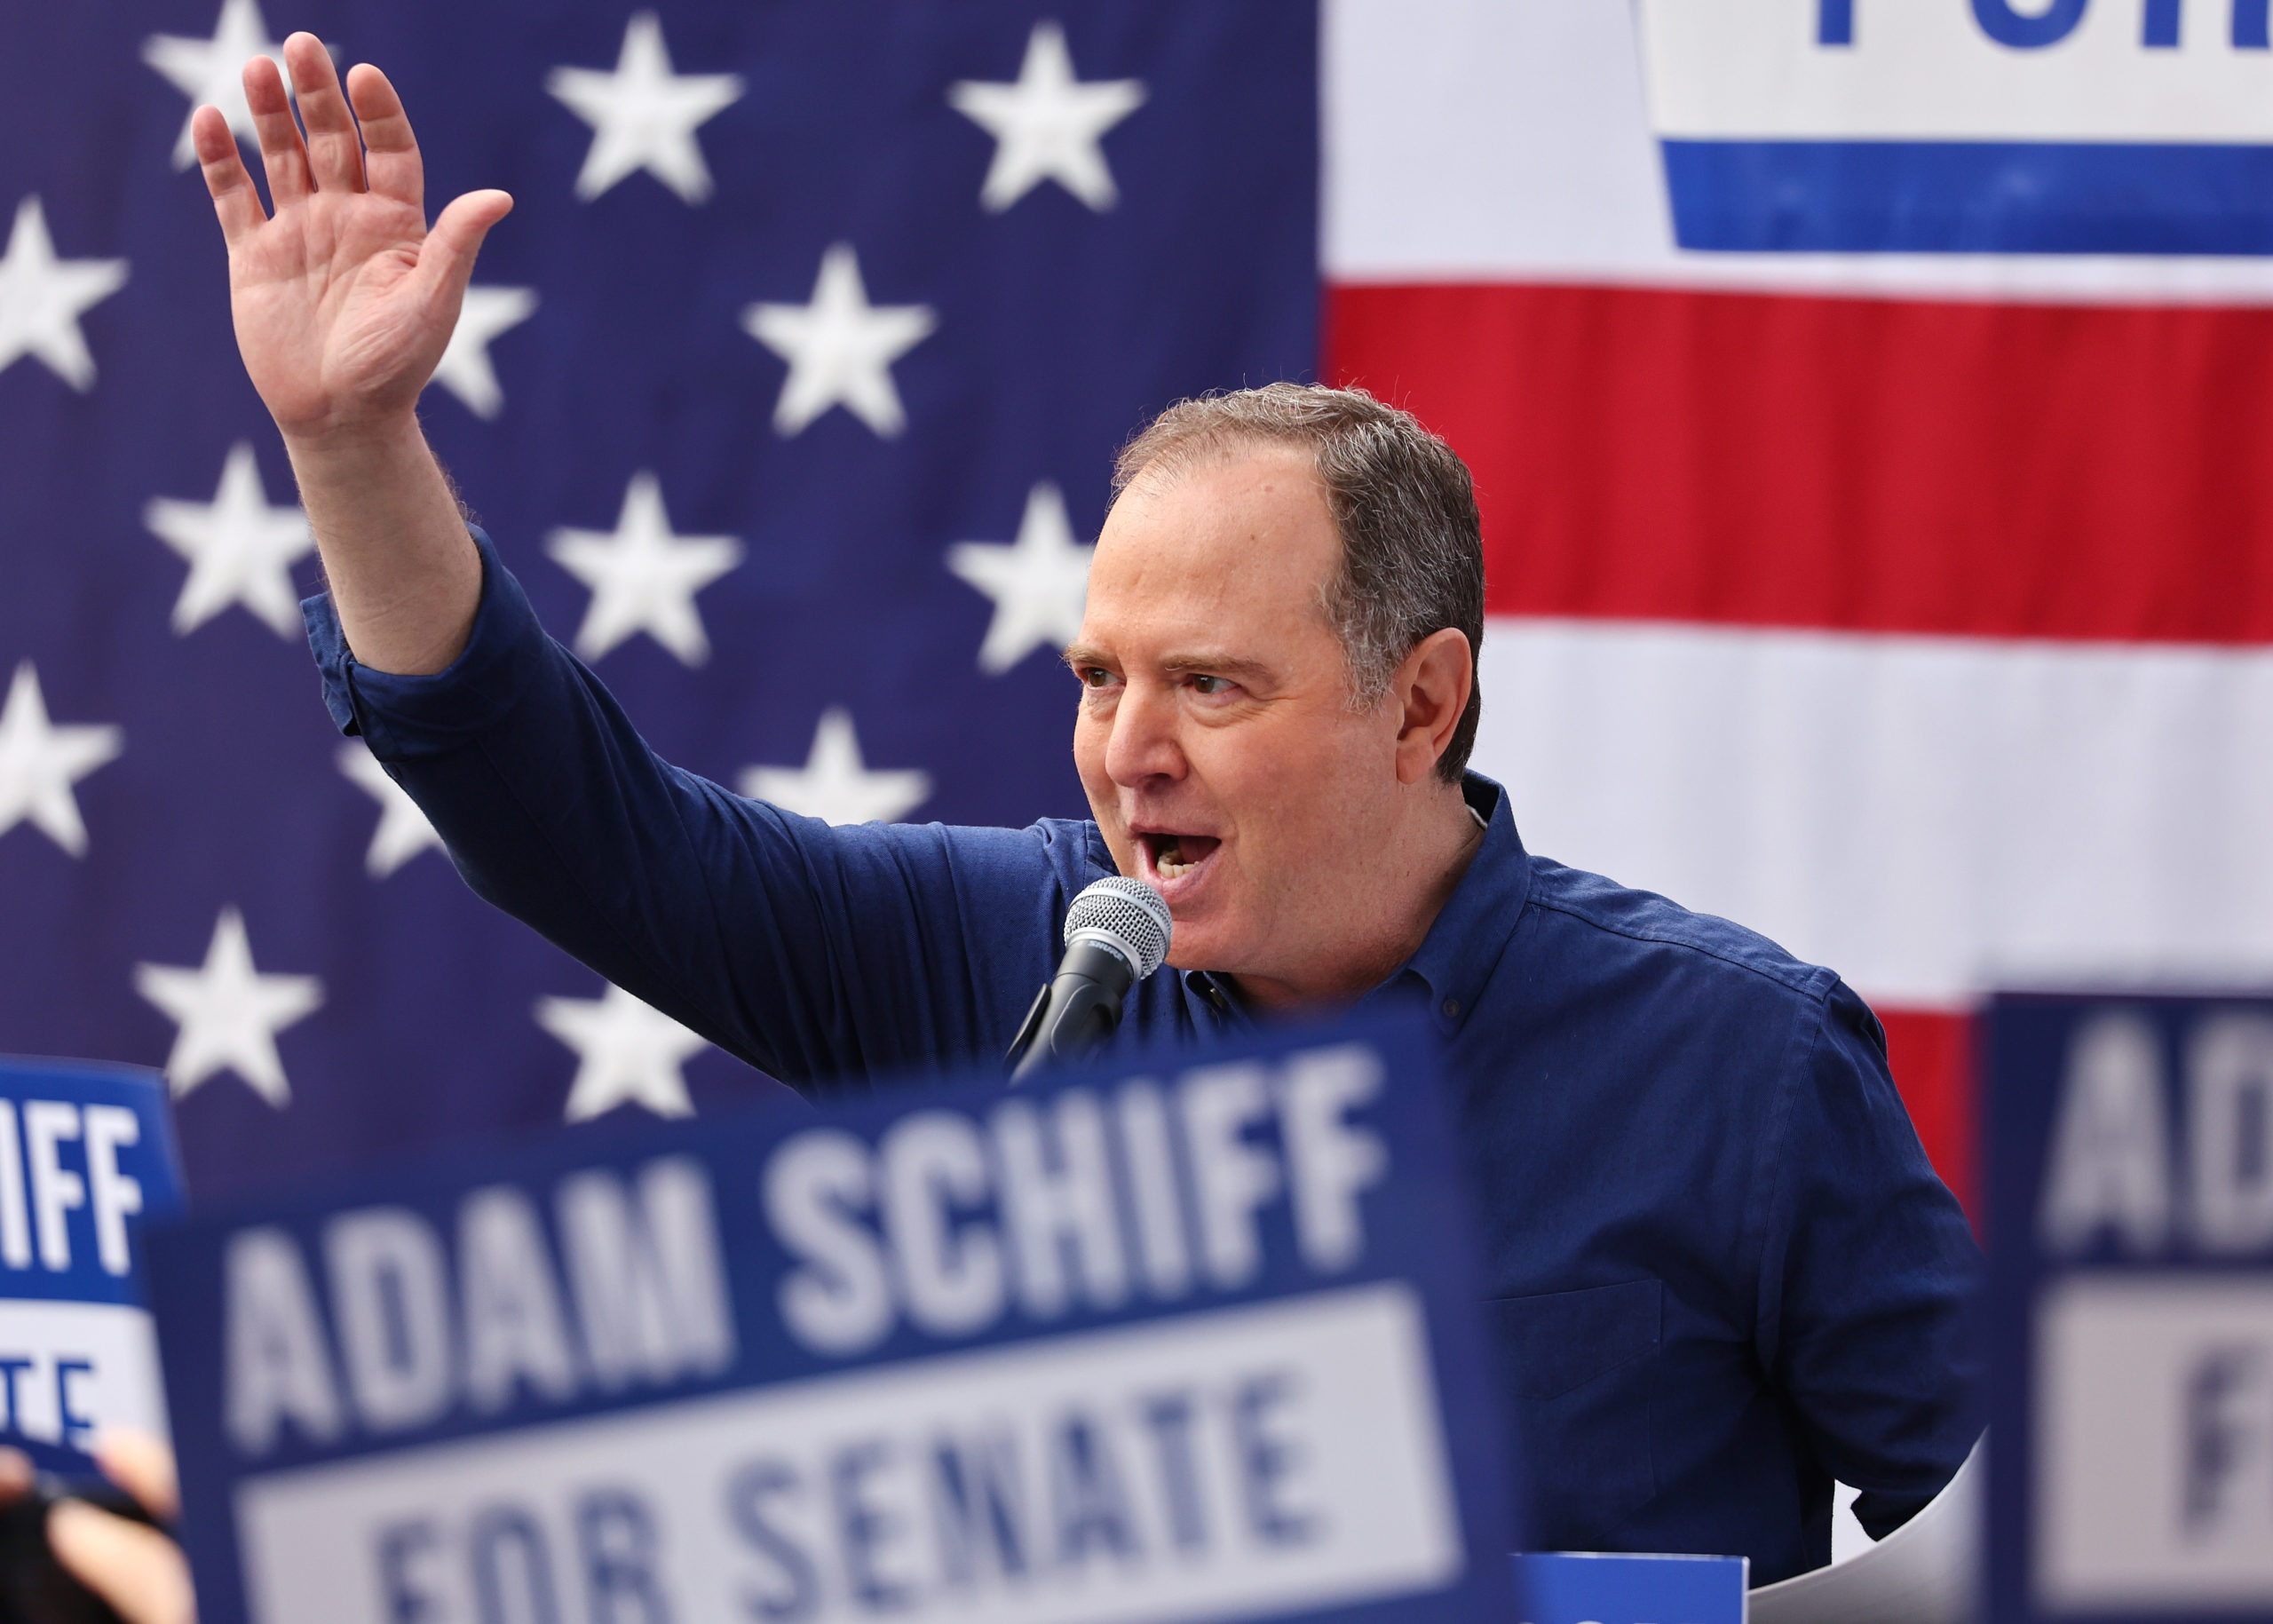 BURBANK, CALIFORNIA - FEBRUARY 11: U.S. Rep. Adam Schiff (D-CA) waves to supporters outside the International Alliance of Theatrical Stage Employees (IATSE) Union Hall, at the kickoff rally for his two-week ‘California for All Tour’, on February 11, 2023 in Burbank, California. Schiff has launched his U.S. Senate campaign and is running in a Democratic field which includes Rep. Katie Porter (D-CA) in the 2024 race to replace Sen. Dianne Feinstein (D-CA), who is expected to retire. (Photo by Mario Tama/Getty Images)